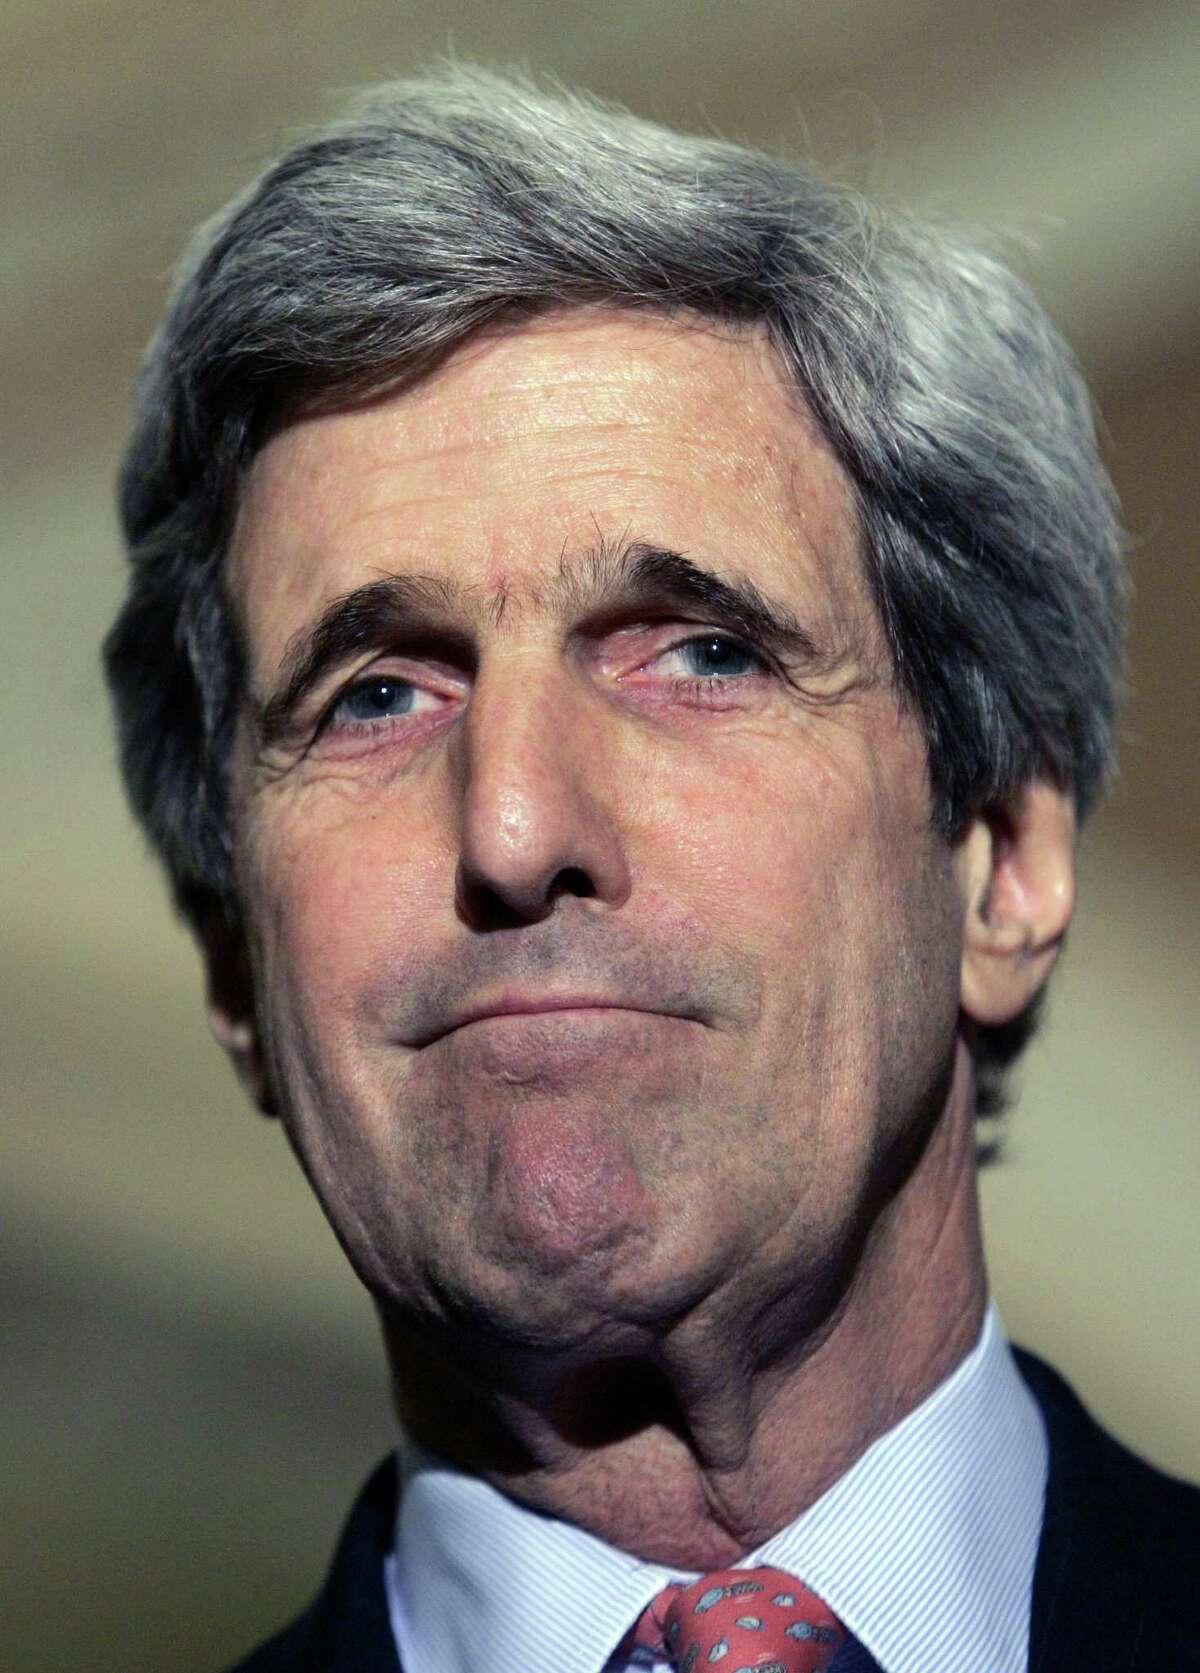 Sen. John Kerry, D-Mass., shown in this May 20, 2008, file photo, will be the featured speaker at The Progressive Forum at 7:30 p.m. Saturday, Sept. 29.